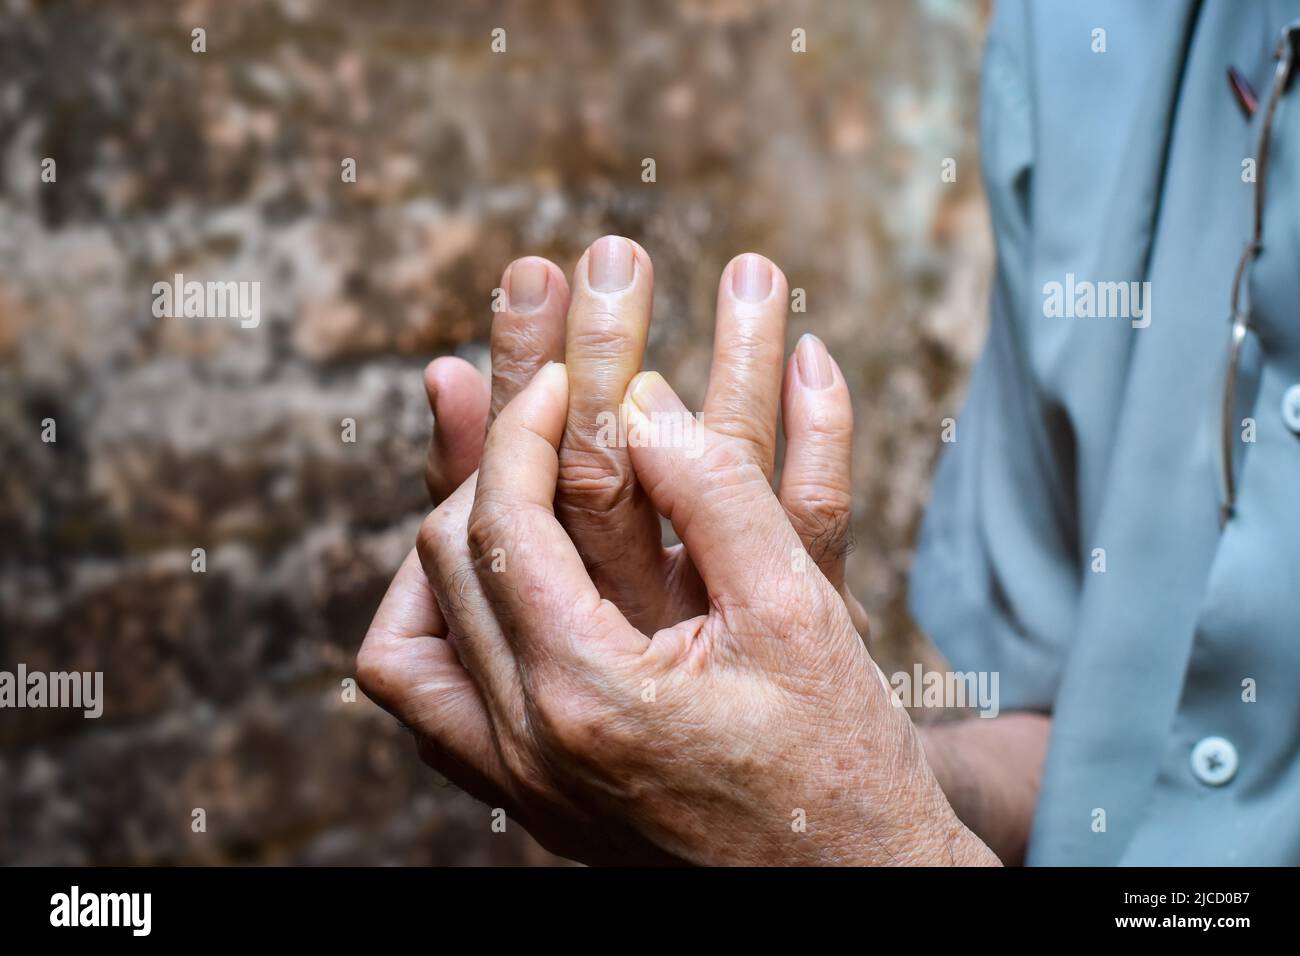 Middle finger pain in Asian old man. Concept of cellulitis and finger problems. Stock Photo